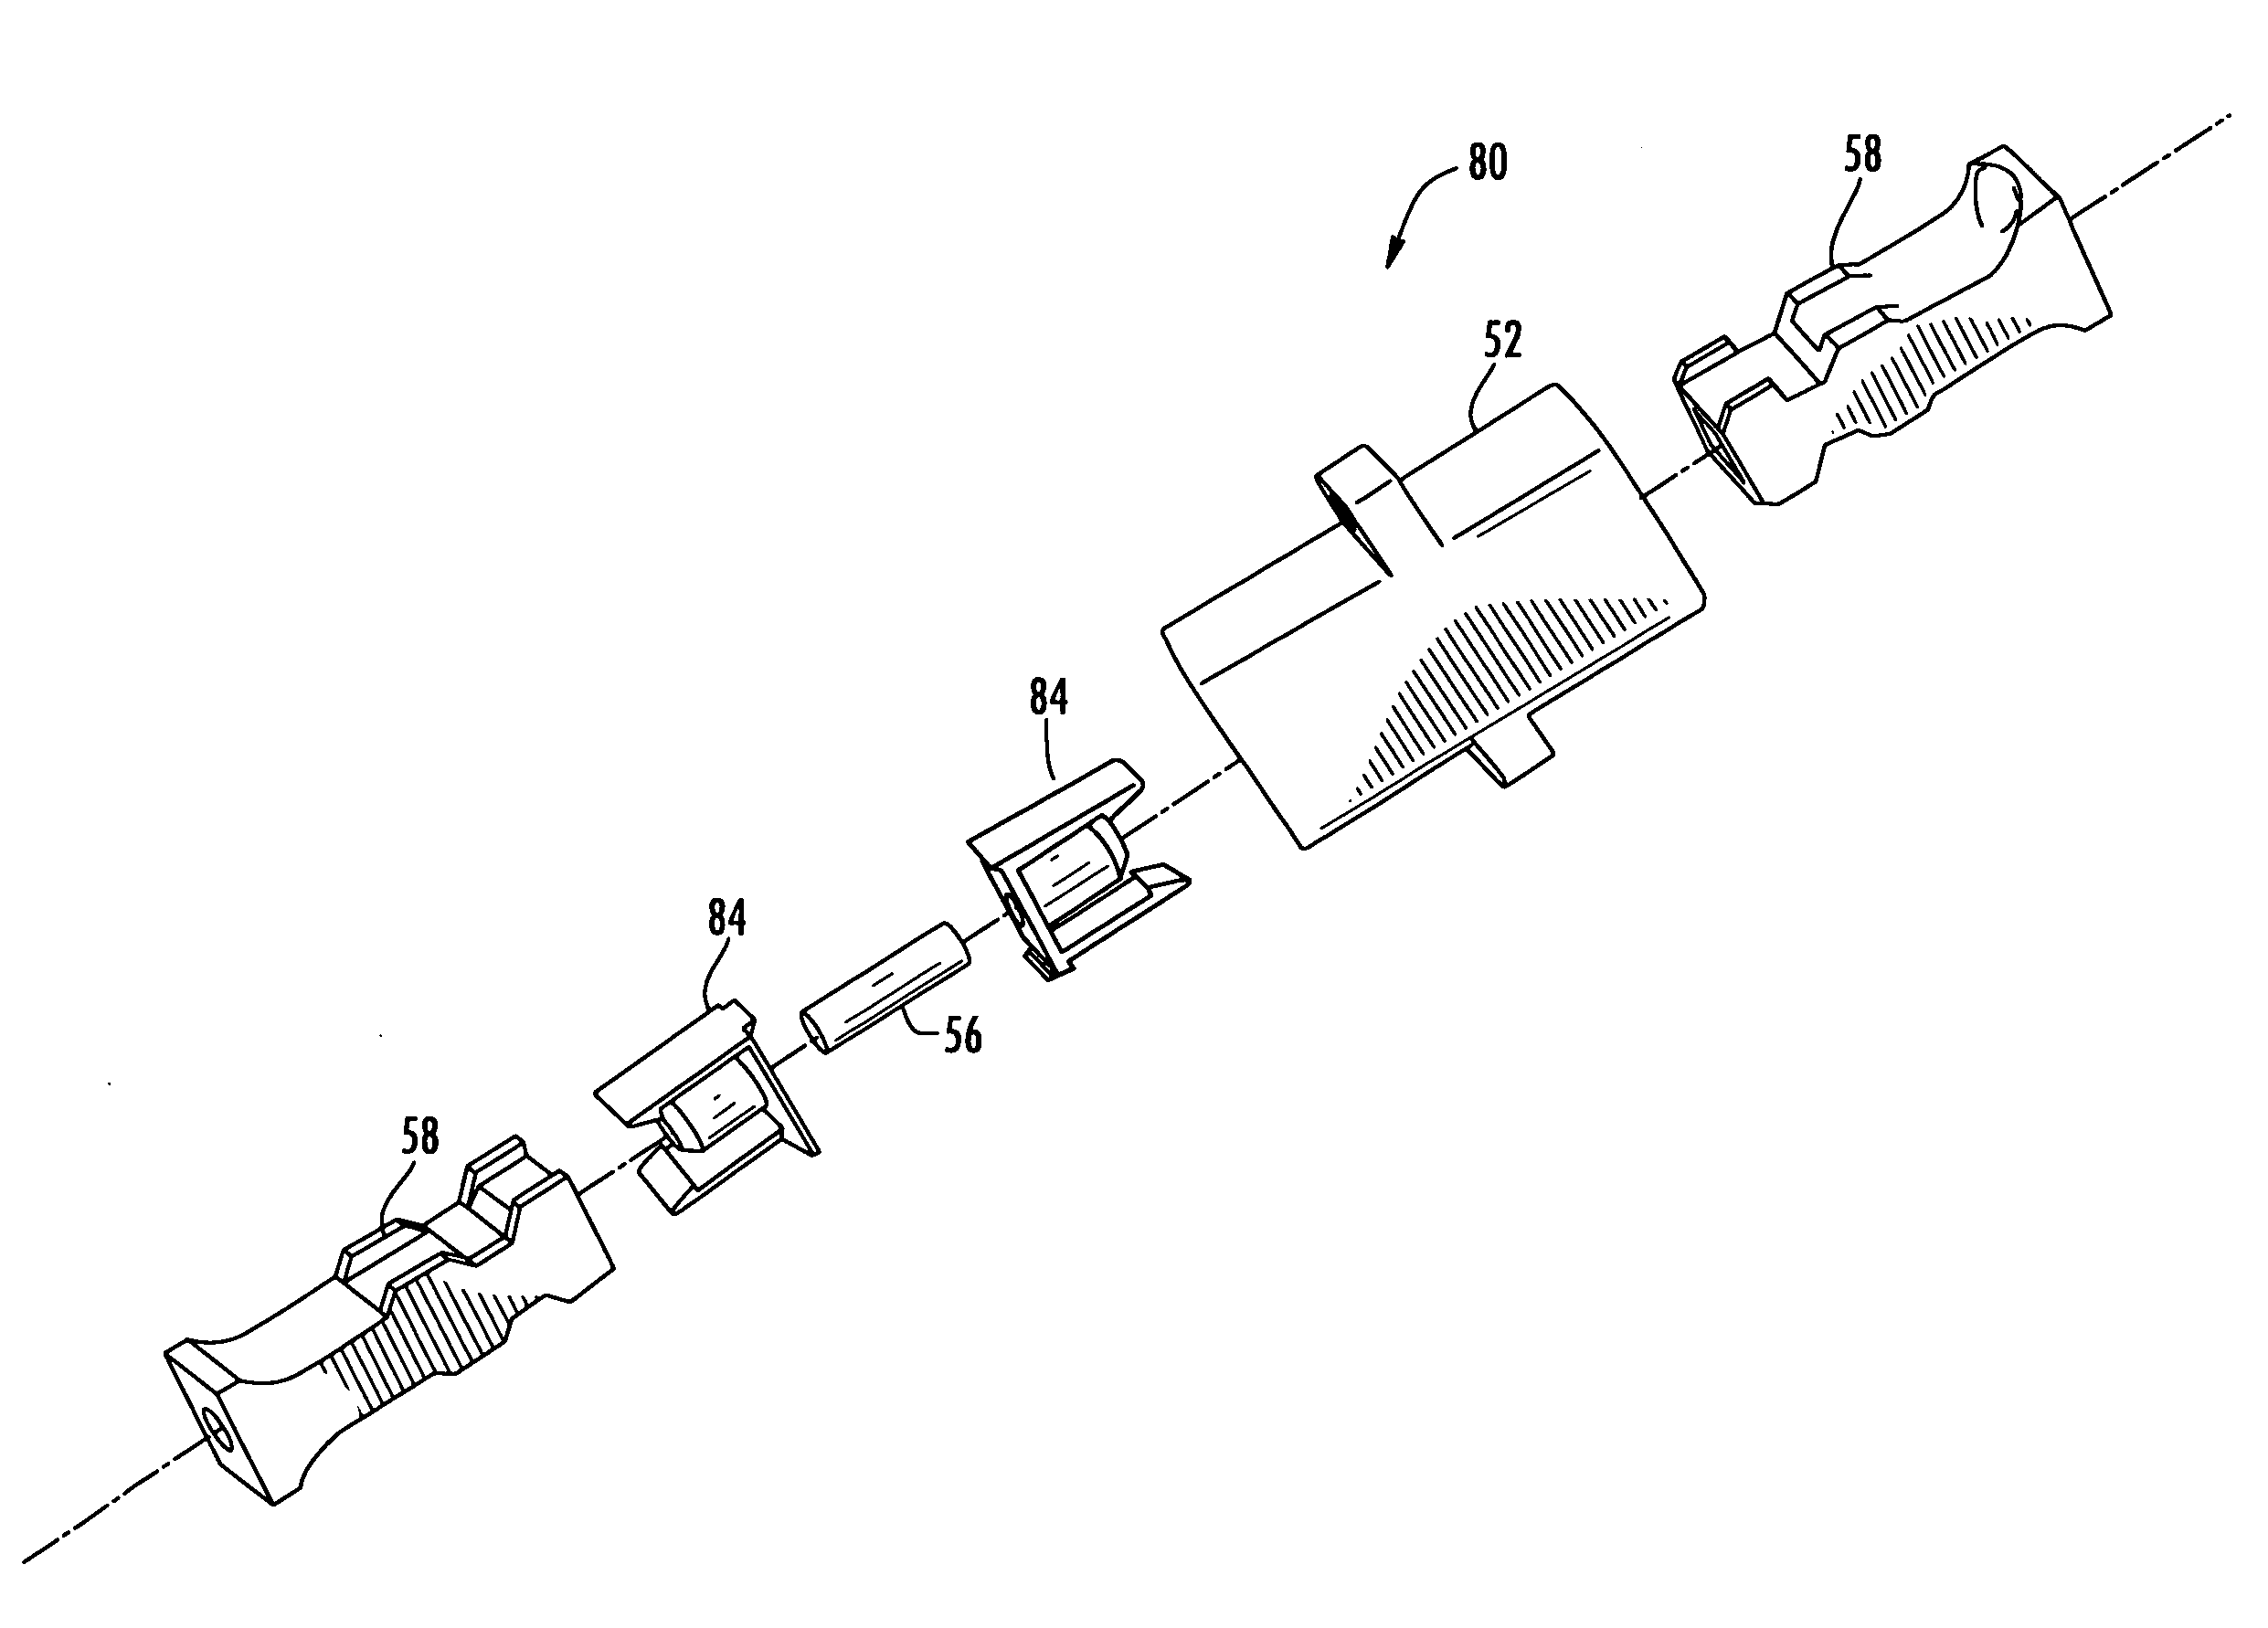 Fiber optic adapter with integrated shutter